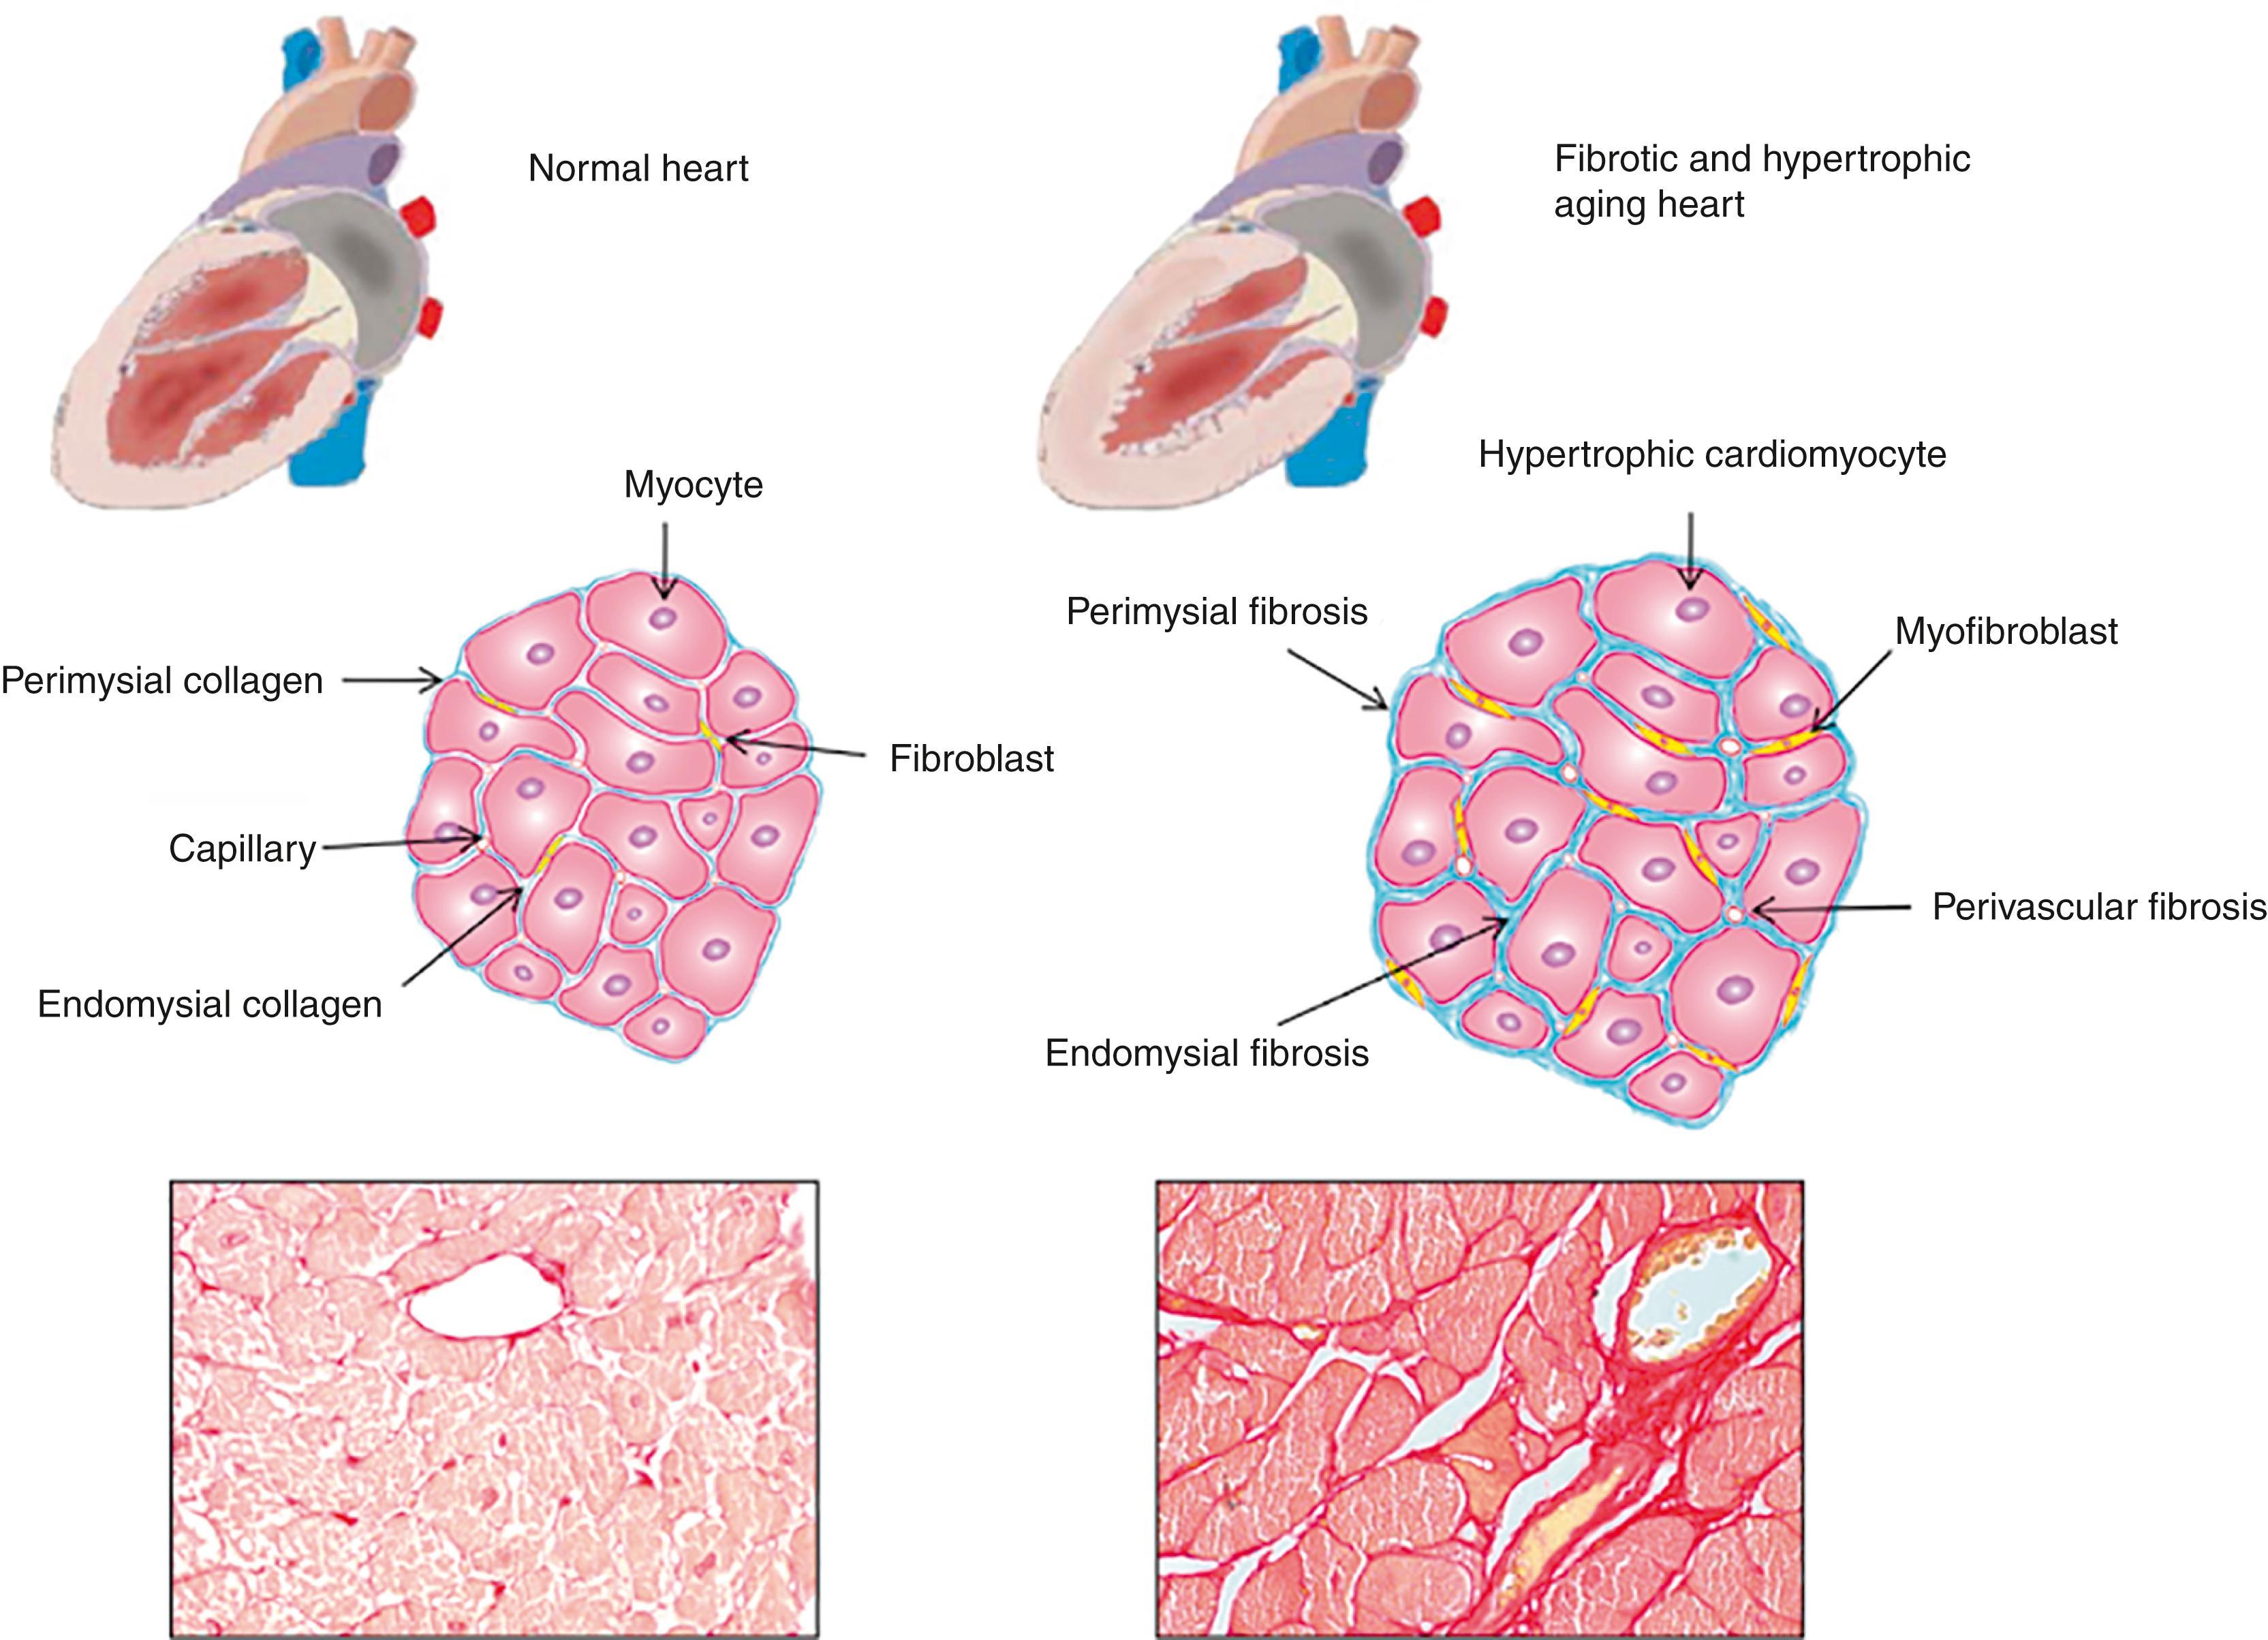 Fig. 36.1, Age-dependent remodeling of the human heart highlighted by a schematic comparison of normal (left) and senescent (right) properties of organ size/shape (top row) and cardiac tissue properties (middle row) . Histopathologic images (bottom row) show remodeled tissue in C57BL/6 mice of different ages (left, 2 months old; right, 2 years old). Red-stained regions indicate collagenous tissue.